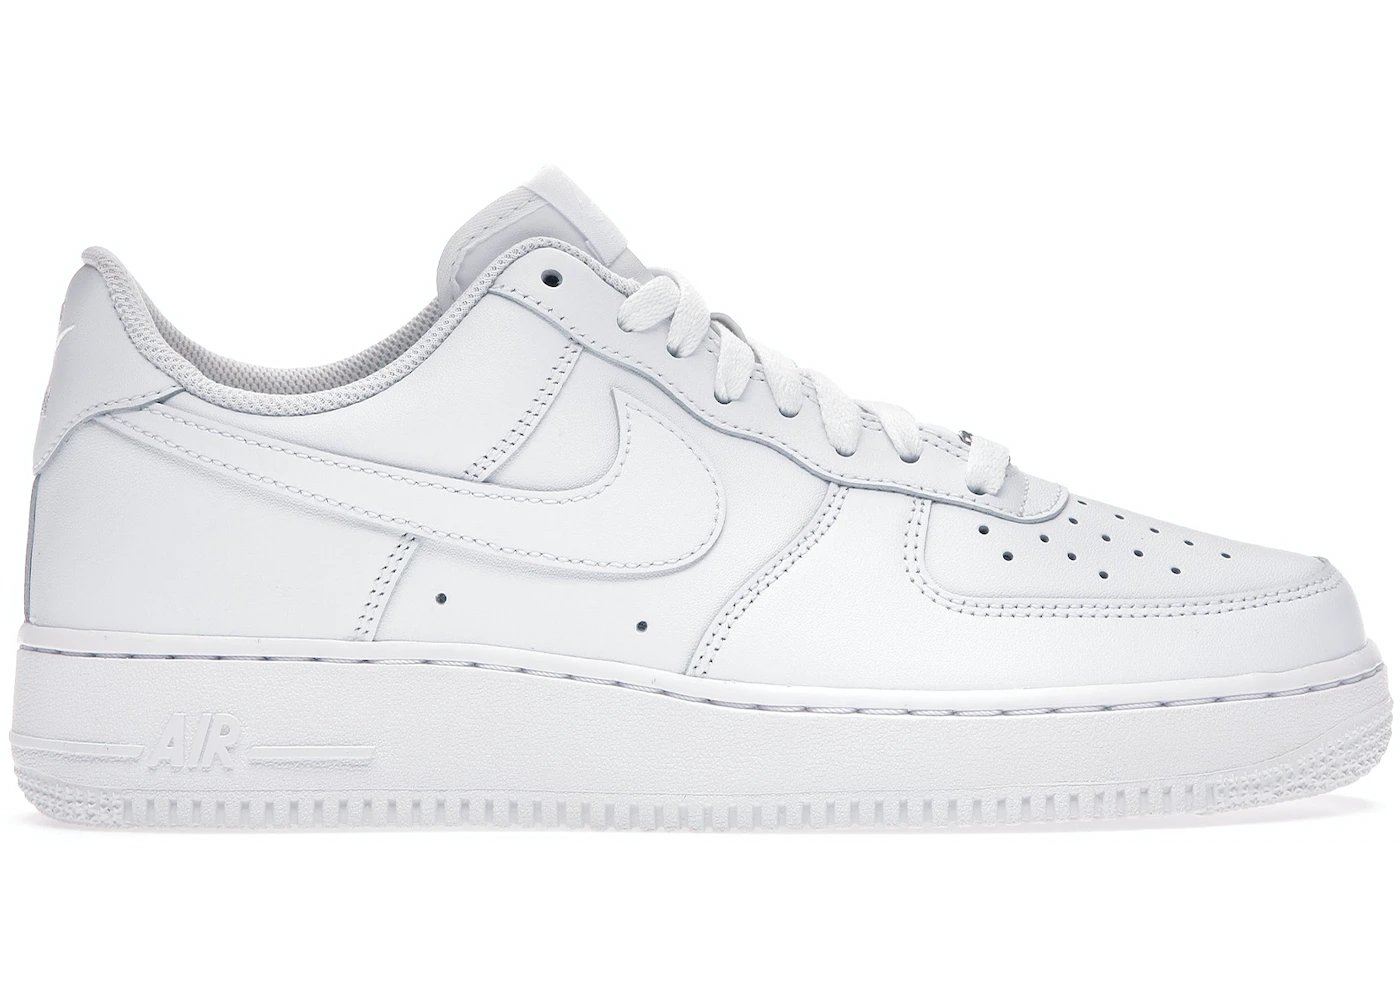 Specialize alien labyrinth Buy Nike Air Force 1 - Low White